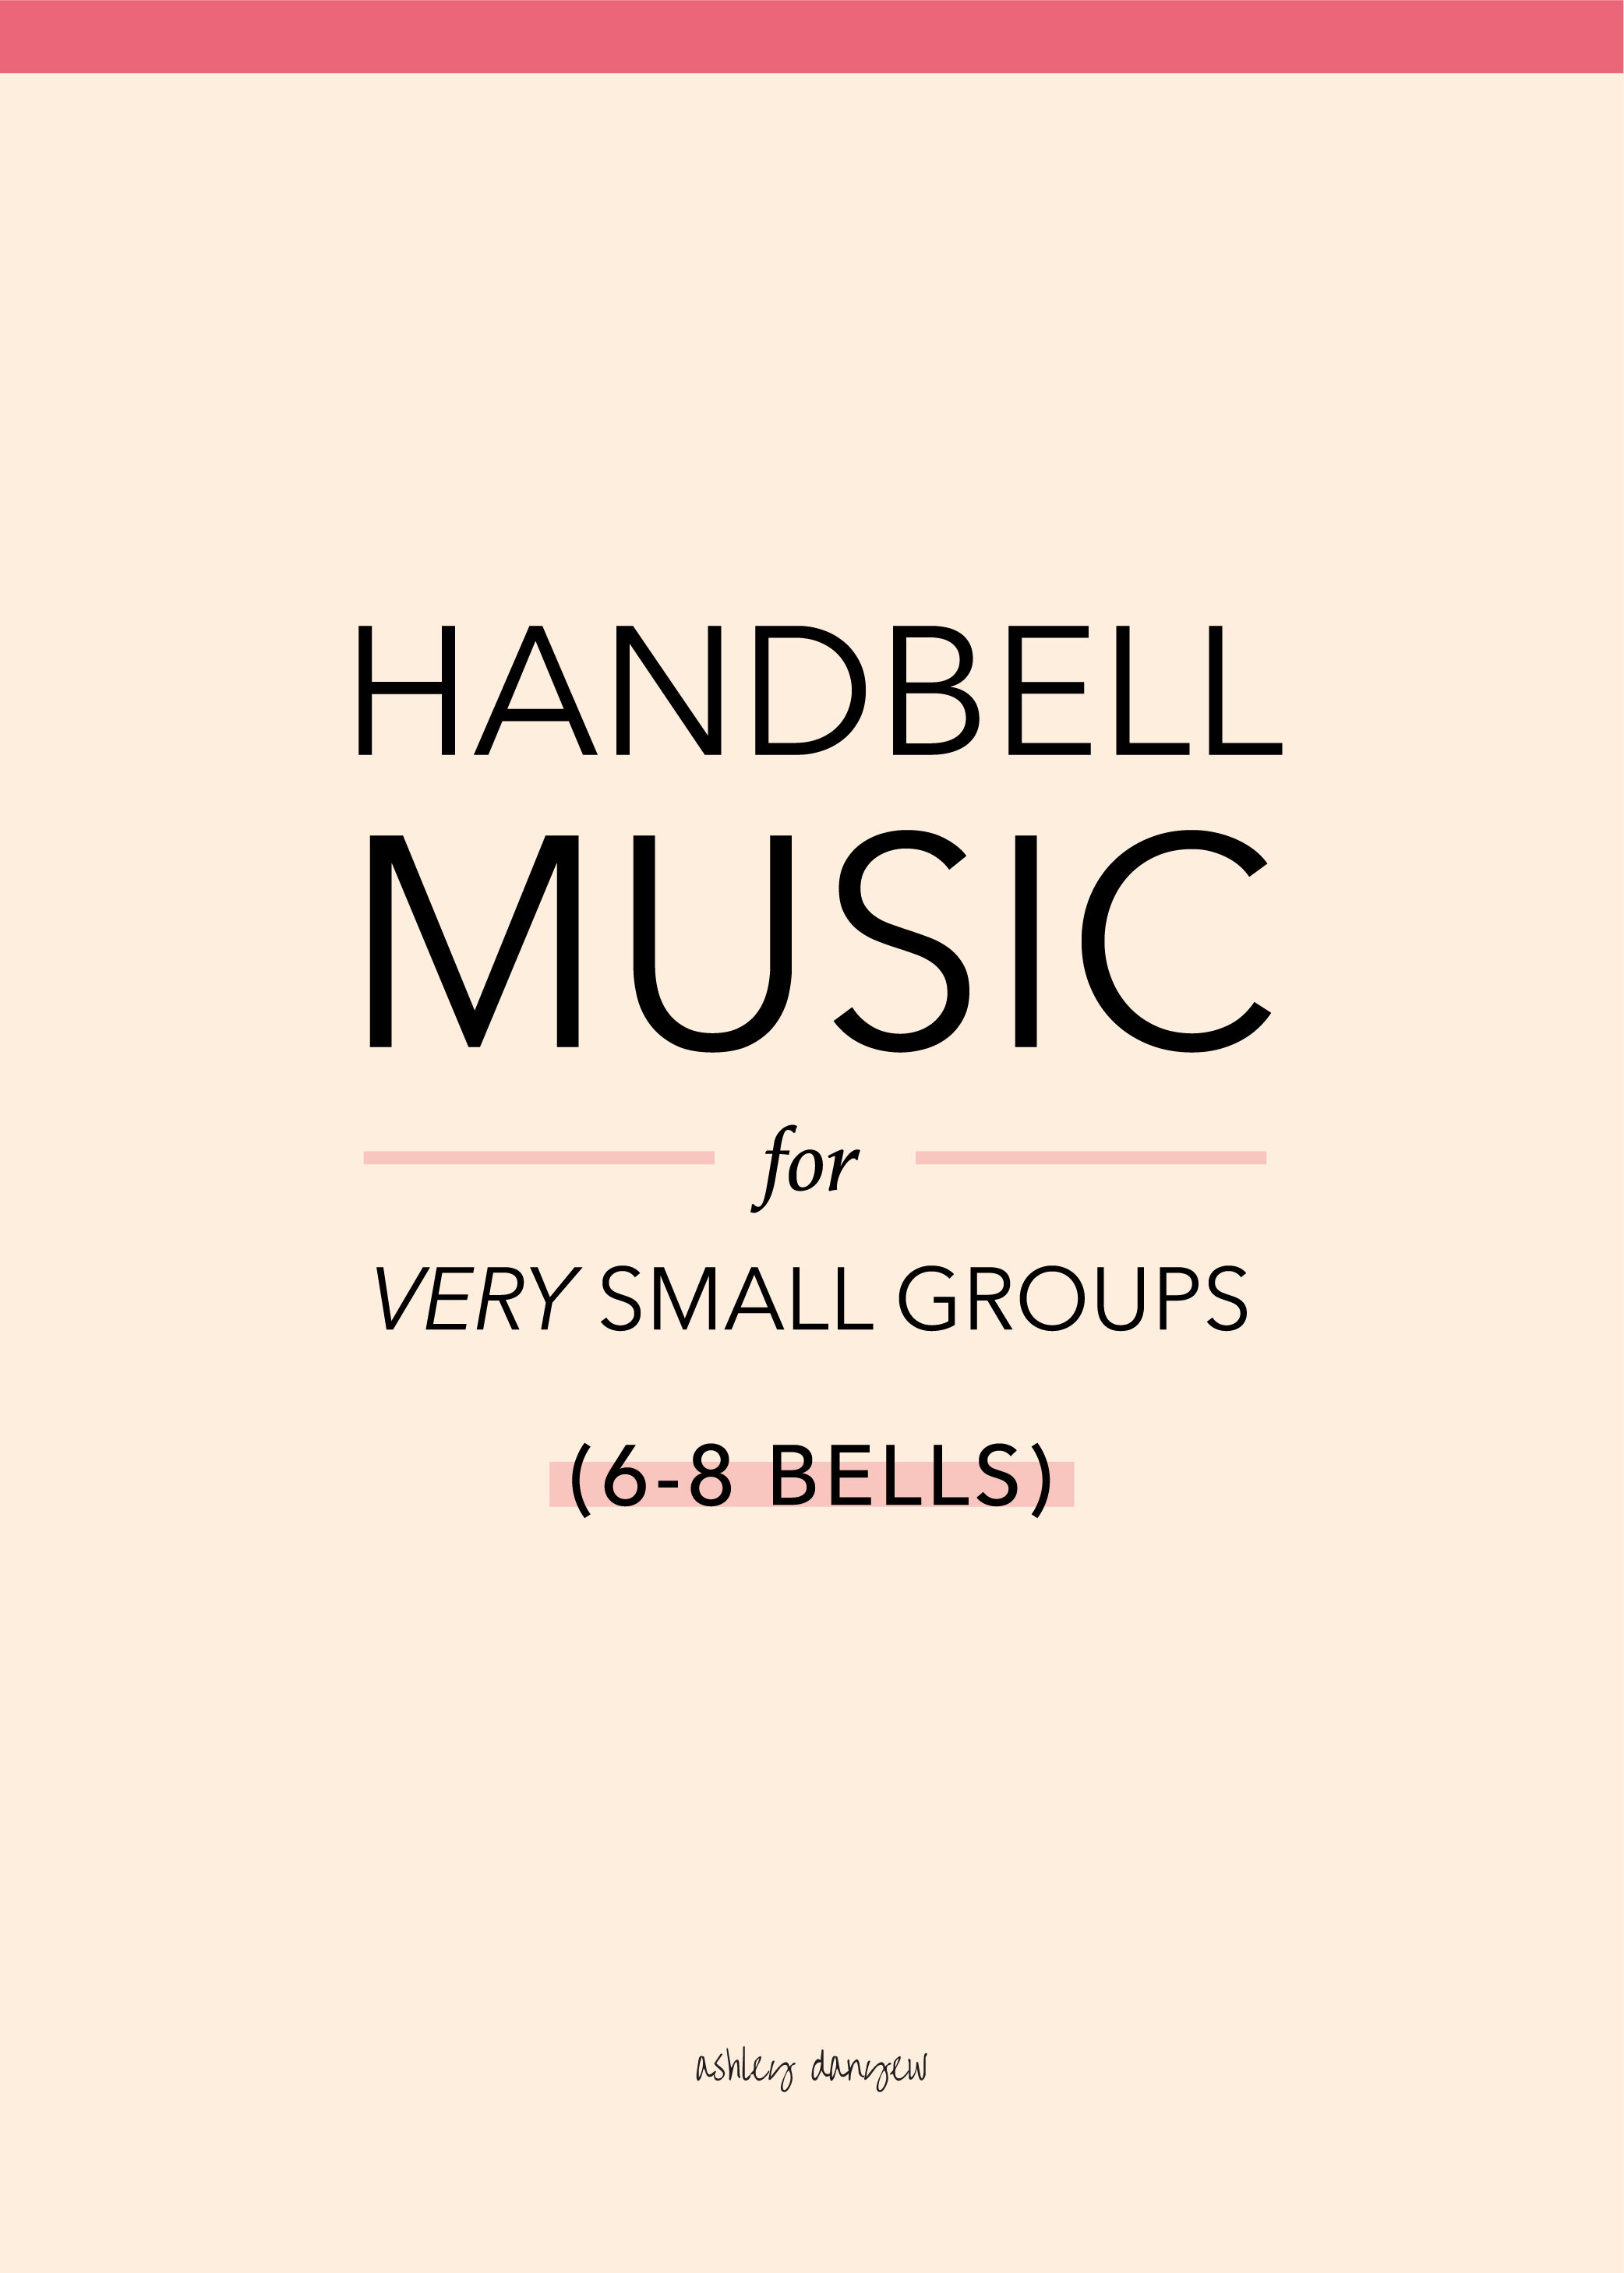 Handbell Music for Very Small Groups (6-8 Bells)